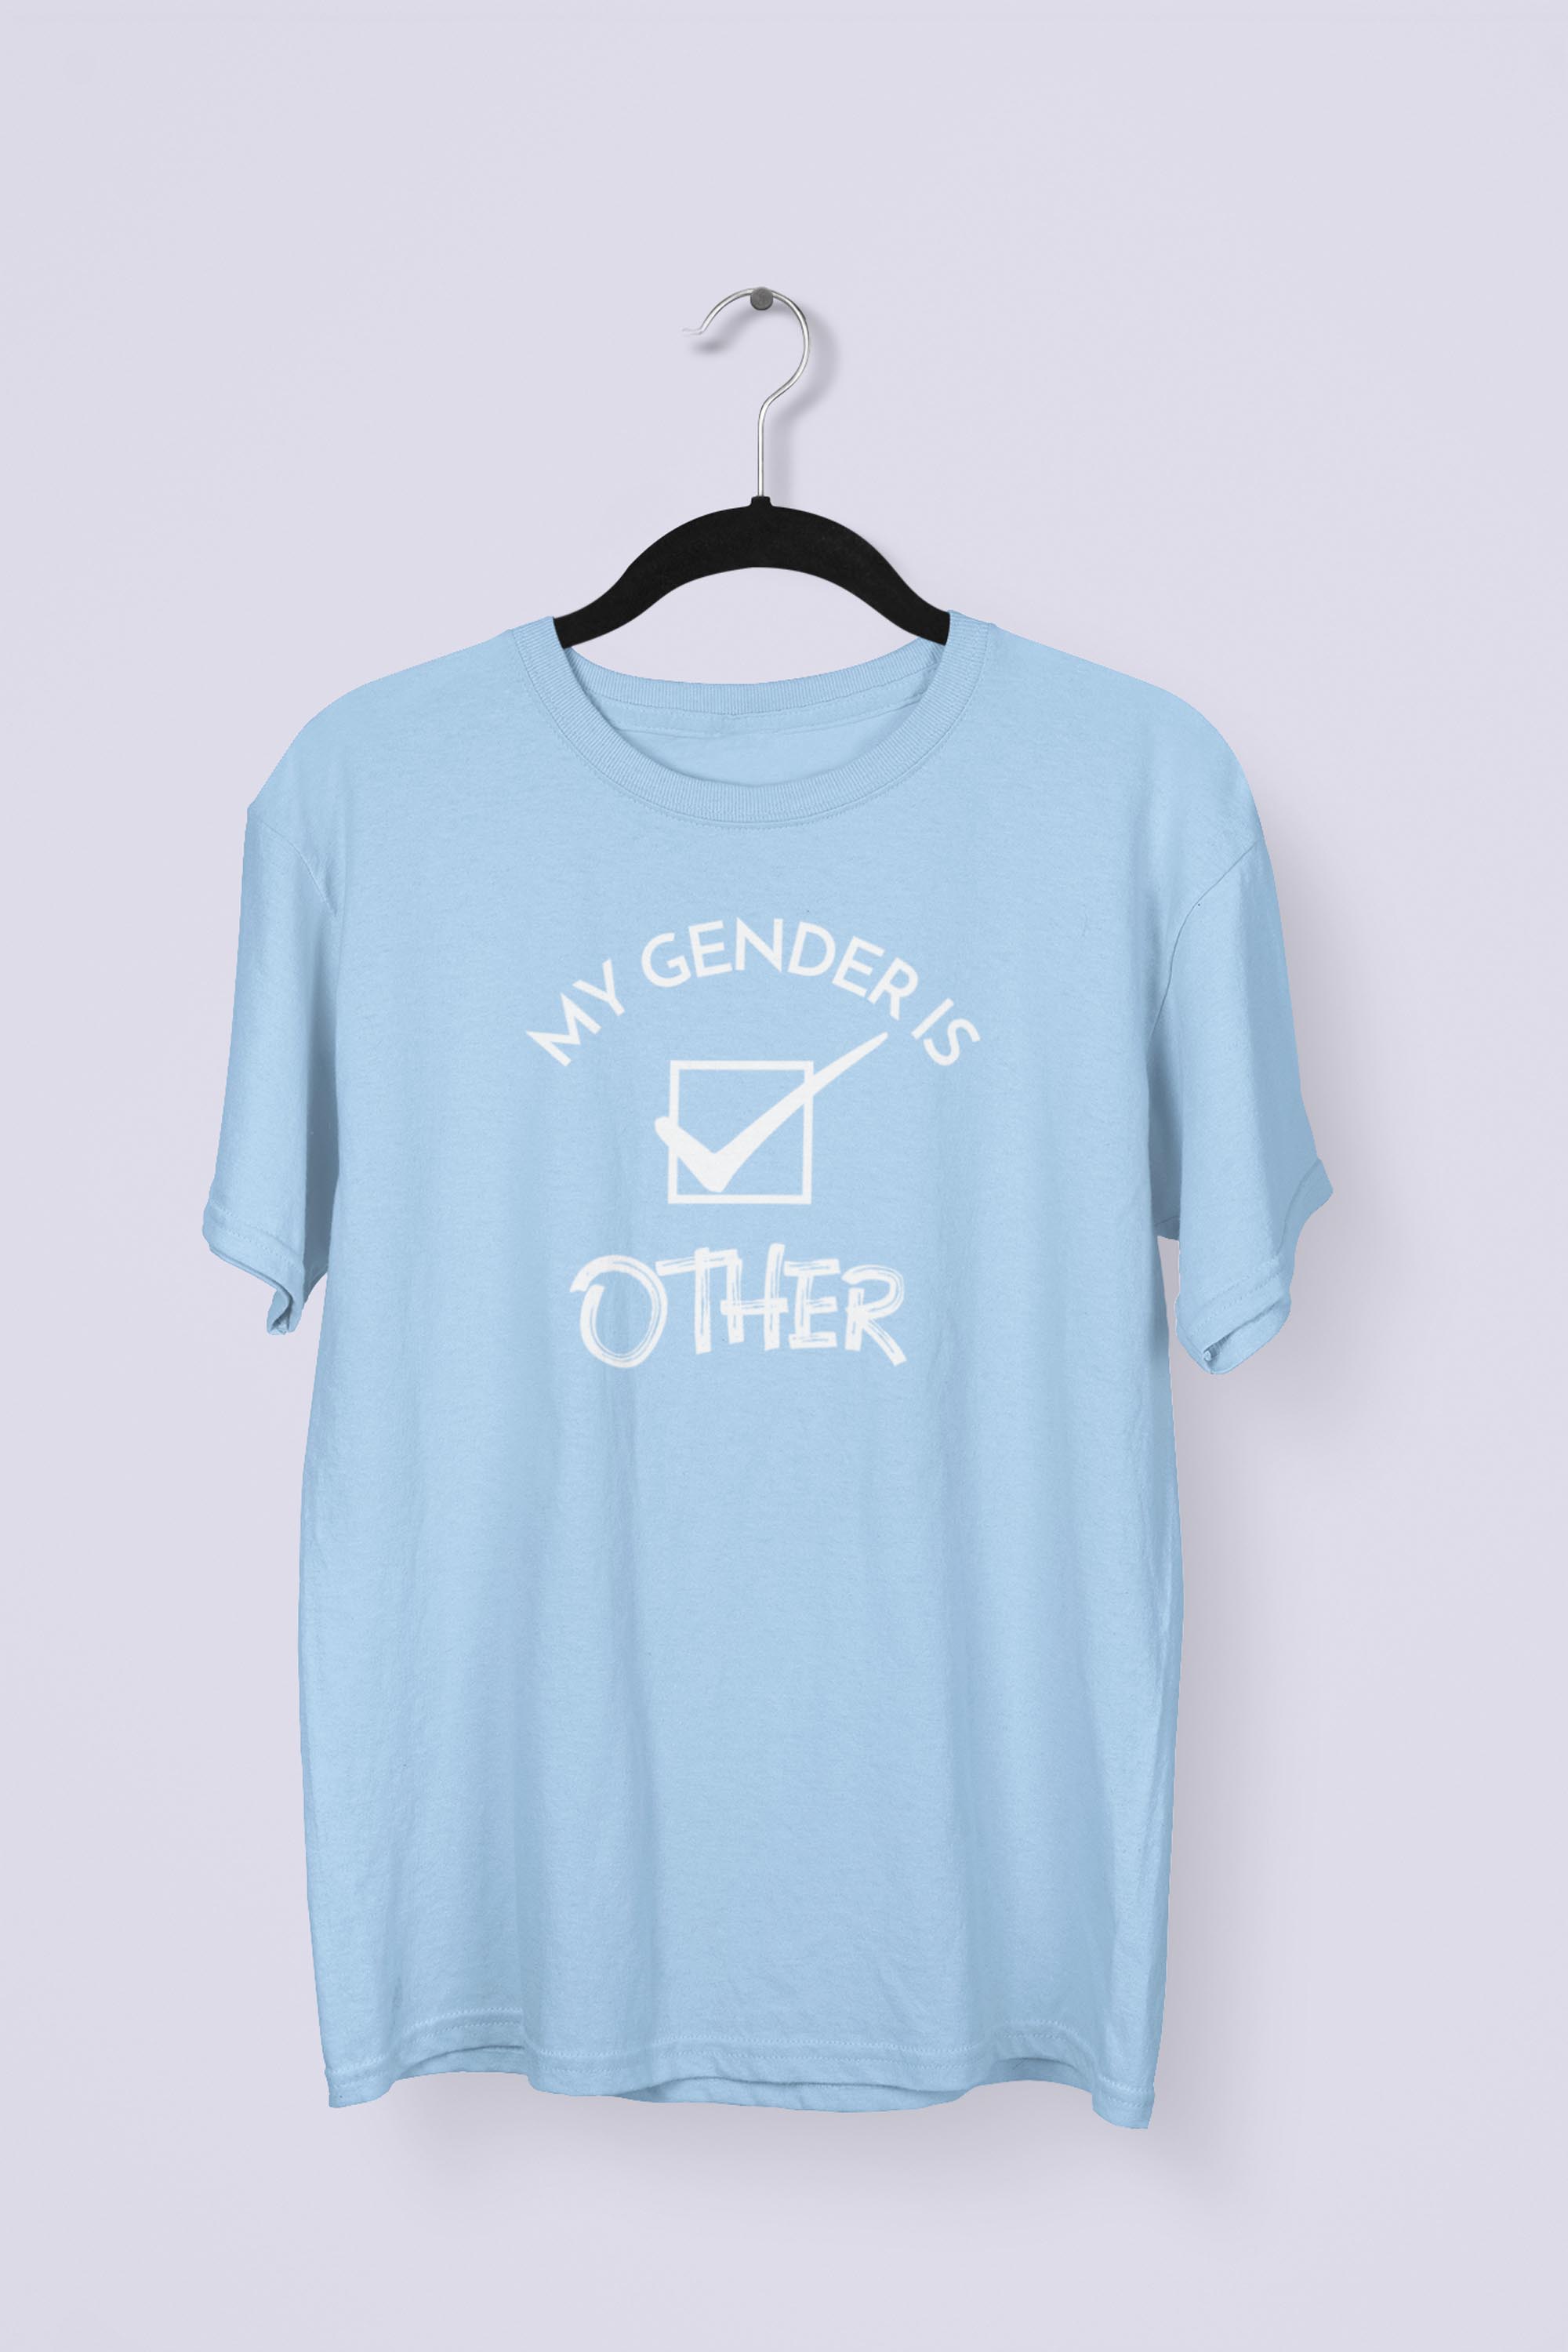 My Gender is Other T-shirt - Light Blue